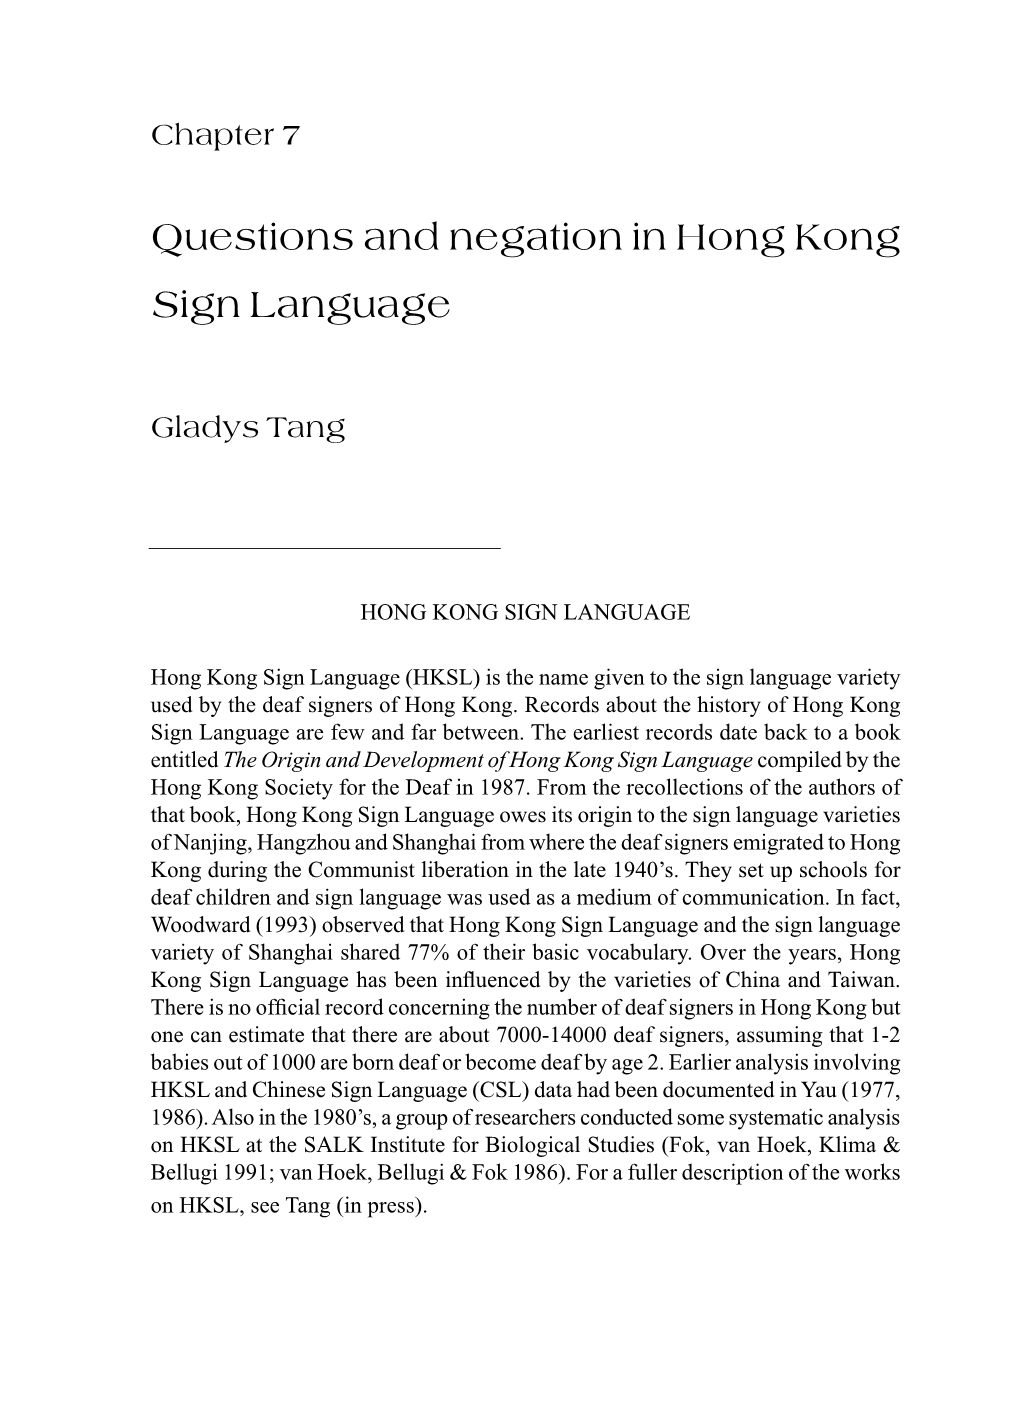 Questions and Negation in Hong Kong Sign Language